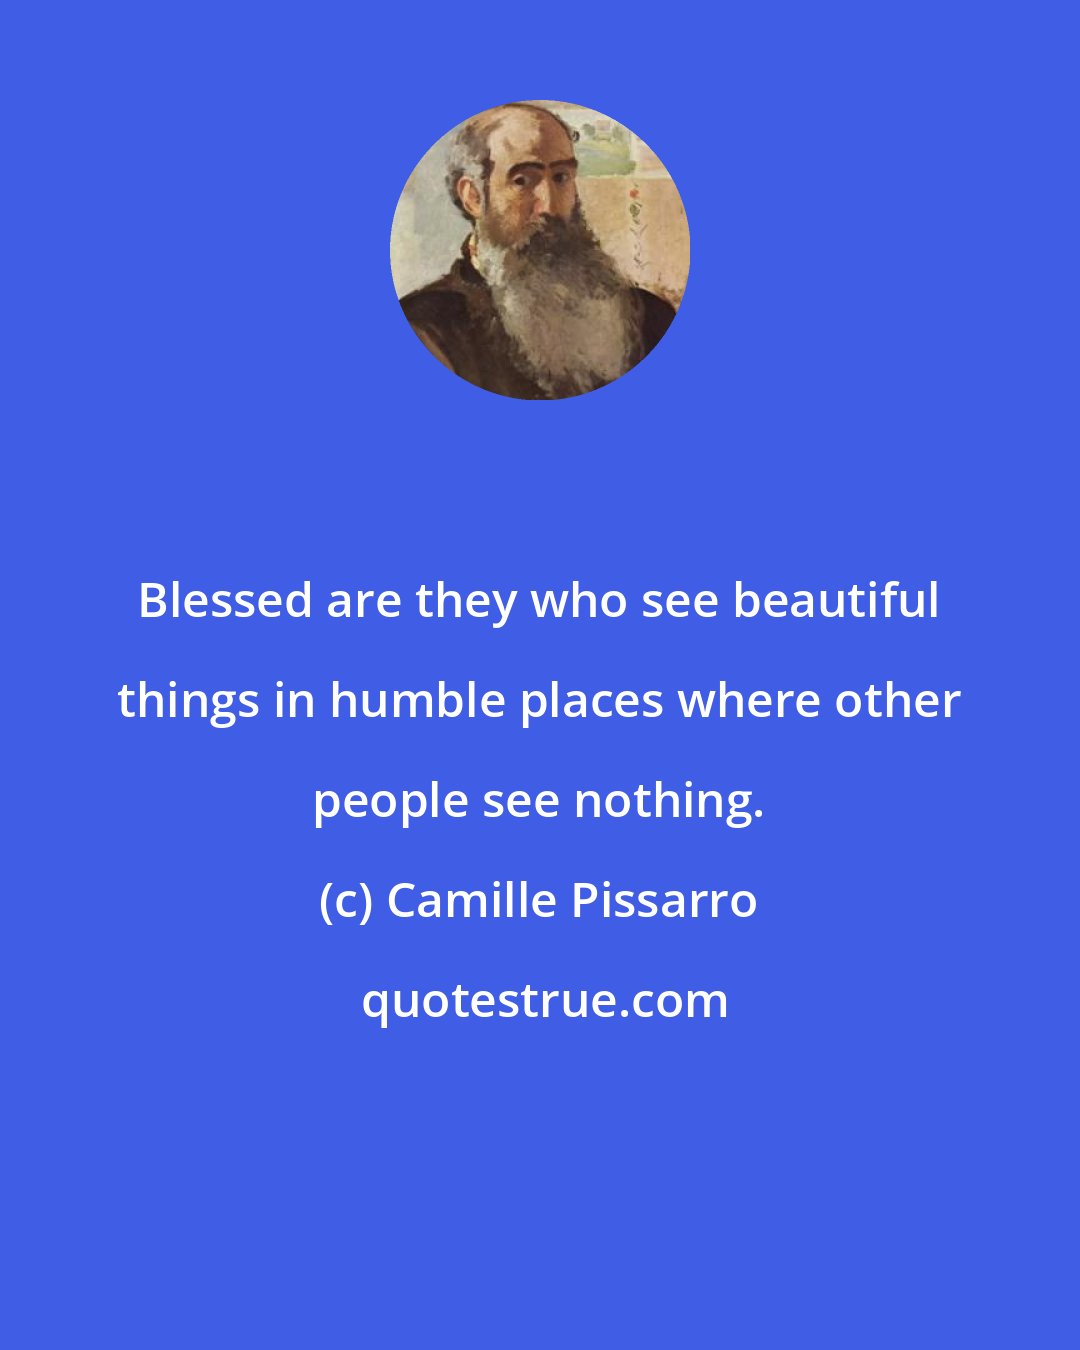 Camille Pissarro: Blessed are they who see beautiful things in humble places where other people see nothing.